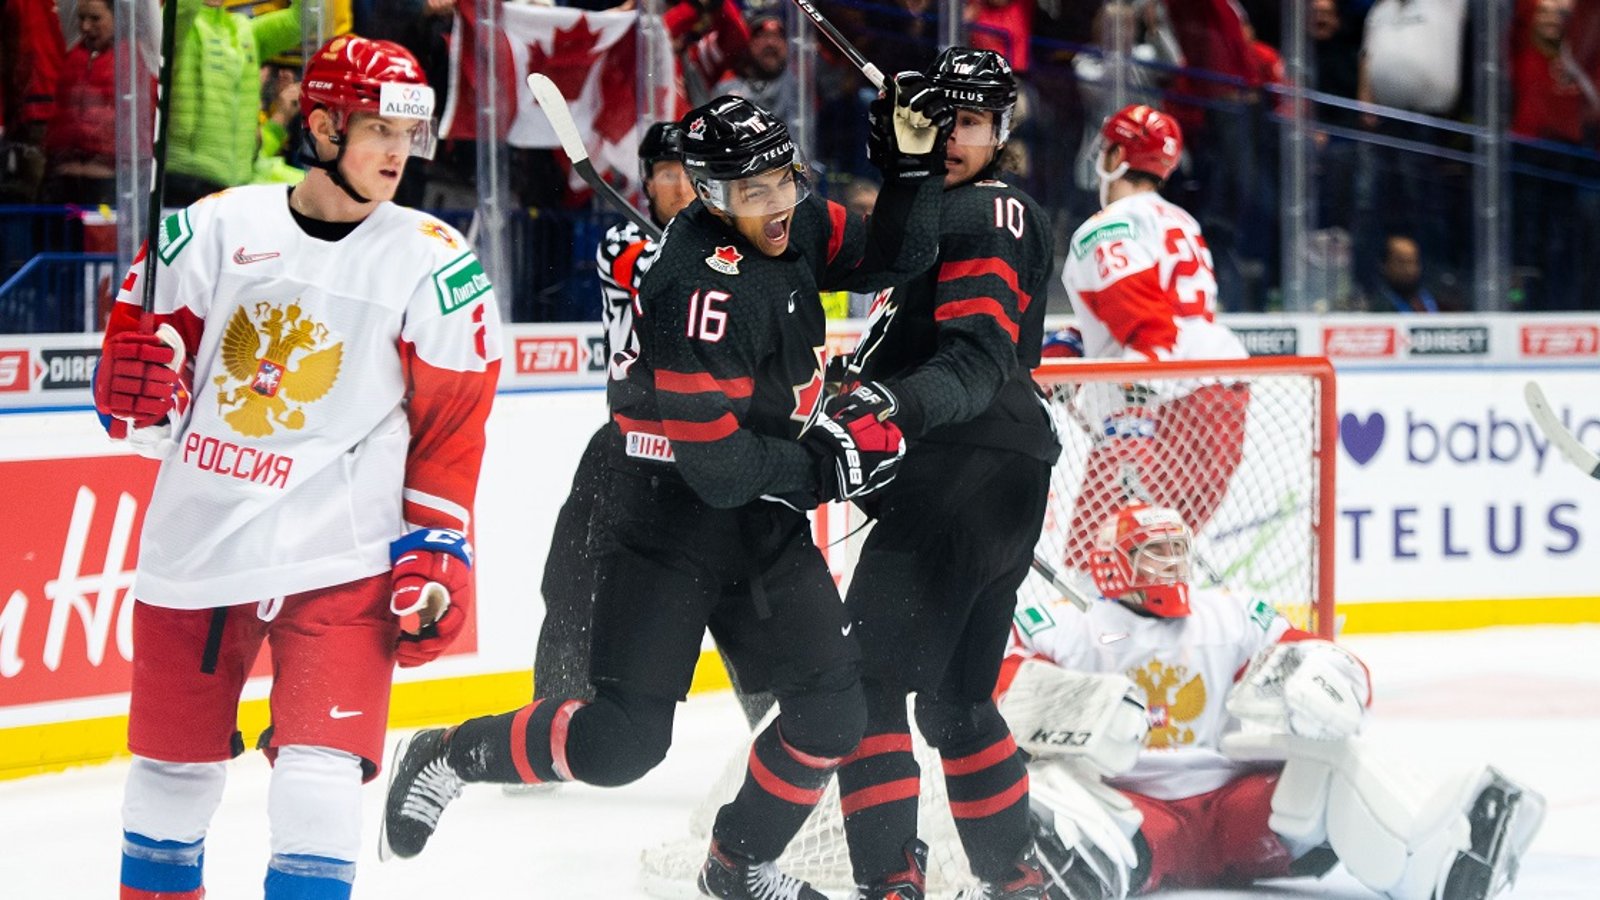 Non-call late in the third period of World Juniors Finals sparks outrage online.